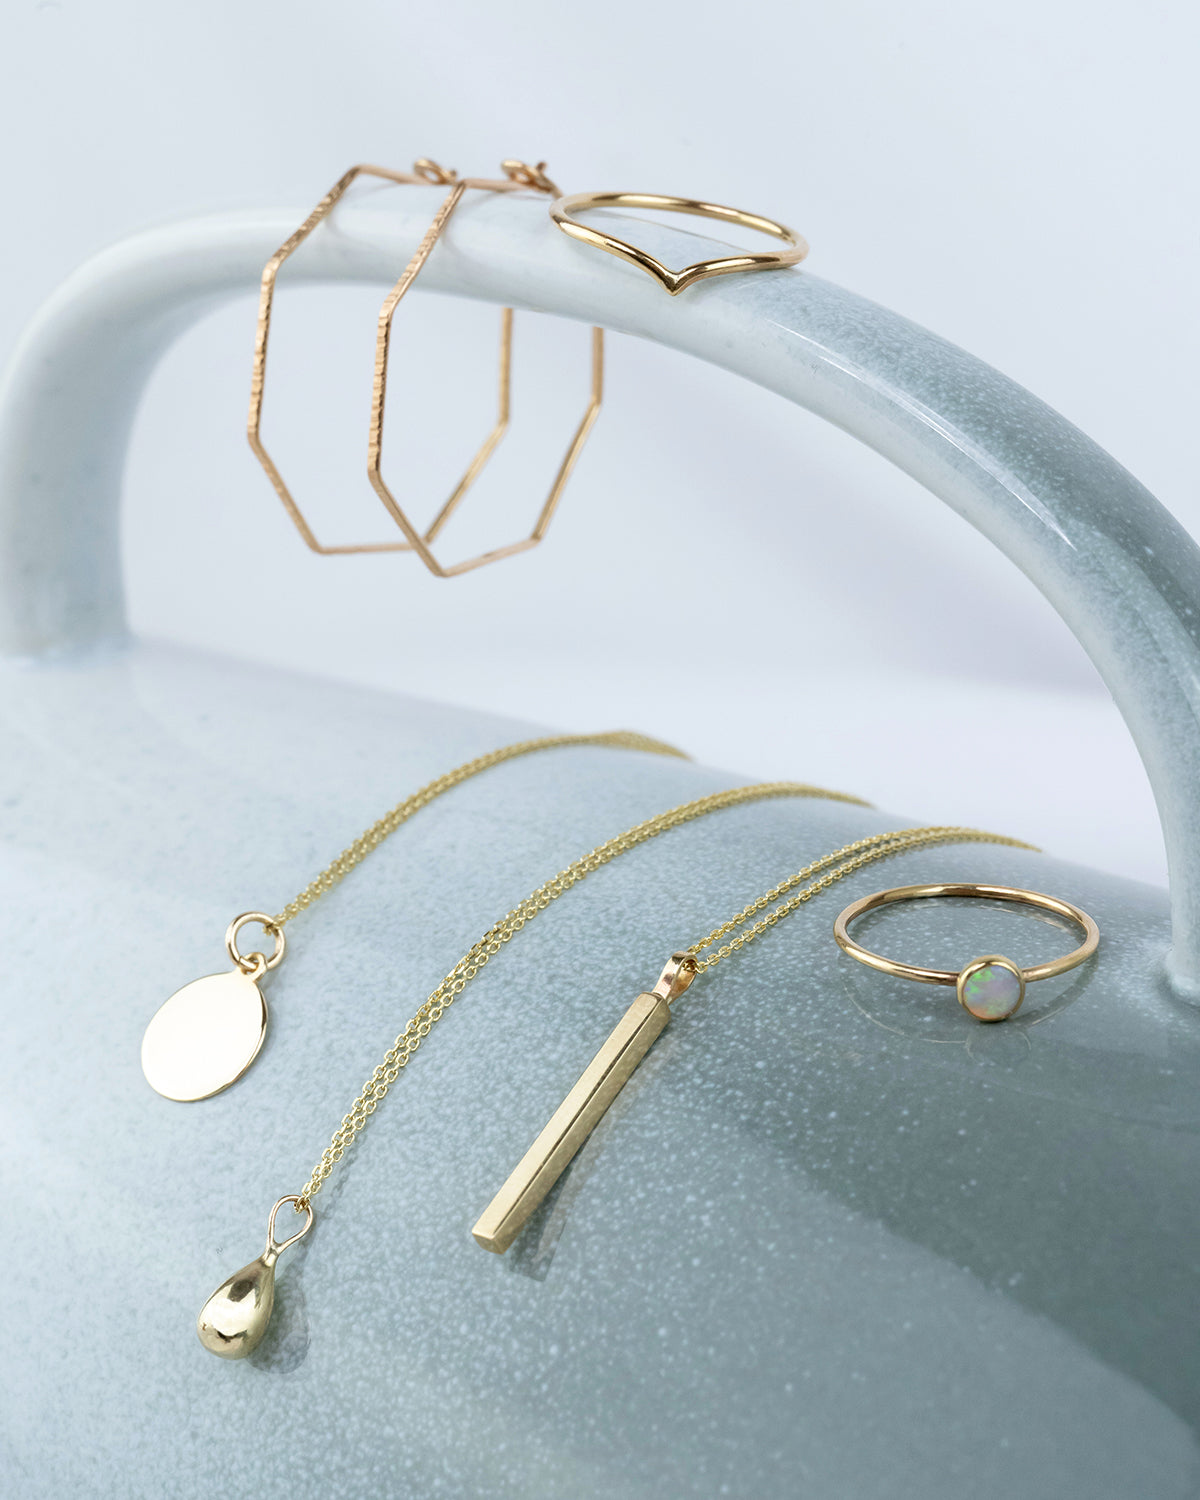 A display of solid gold jewellery made by independent designers, including rings, necklaces and earrings